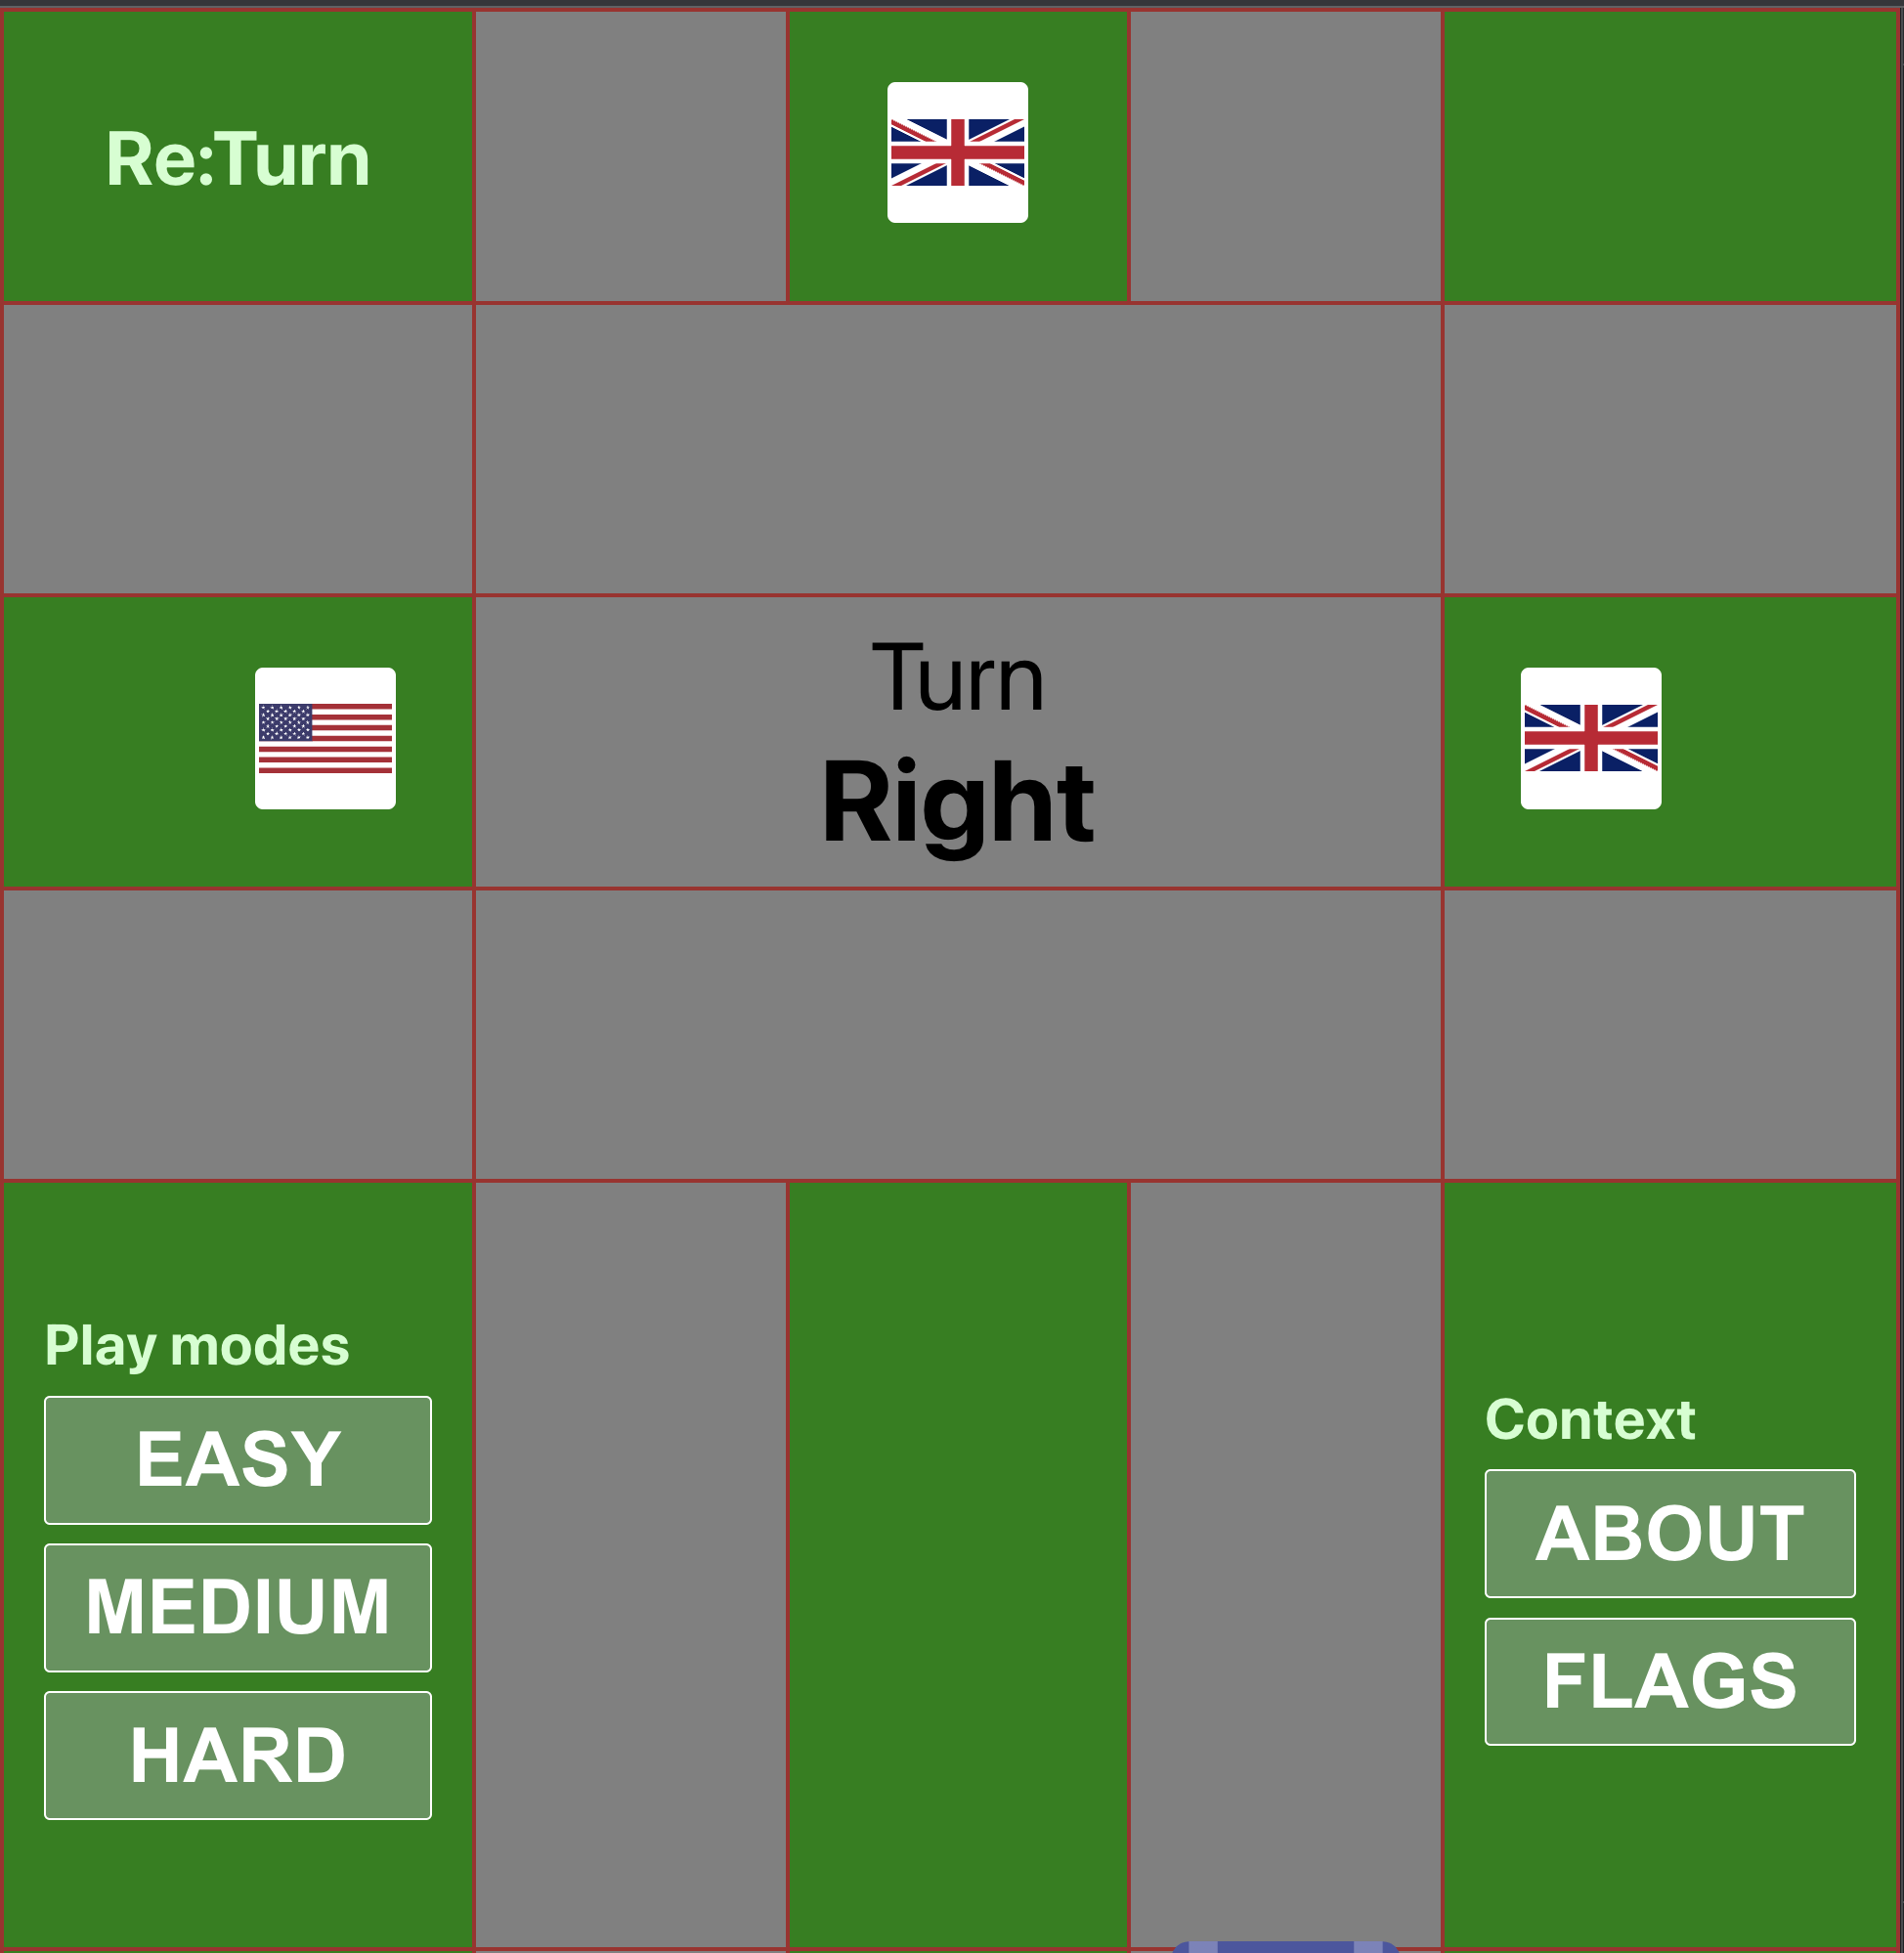 Game's central table with border spacing enabled to show the layout more clearly